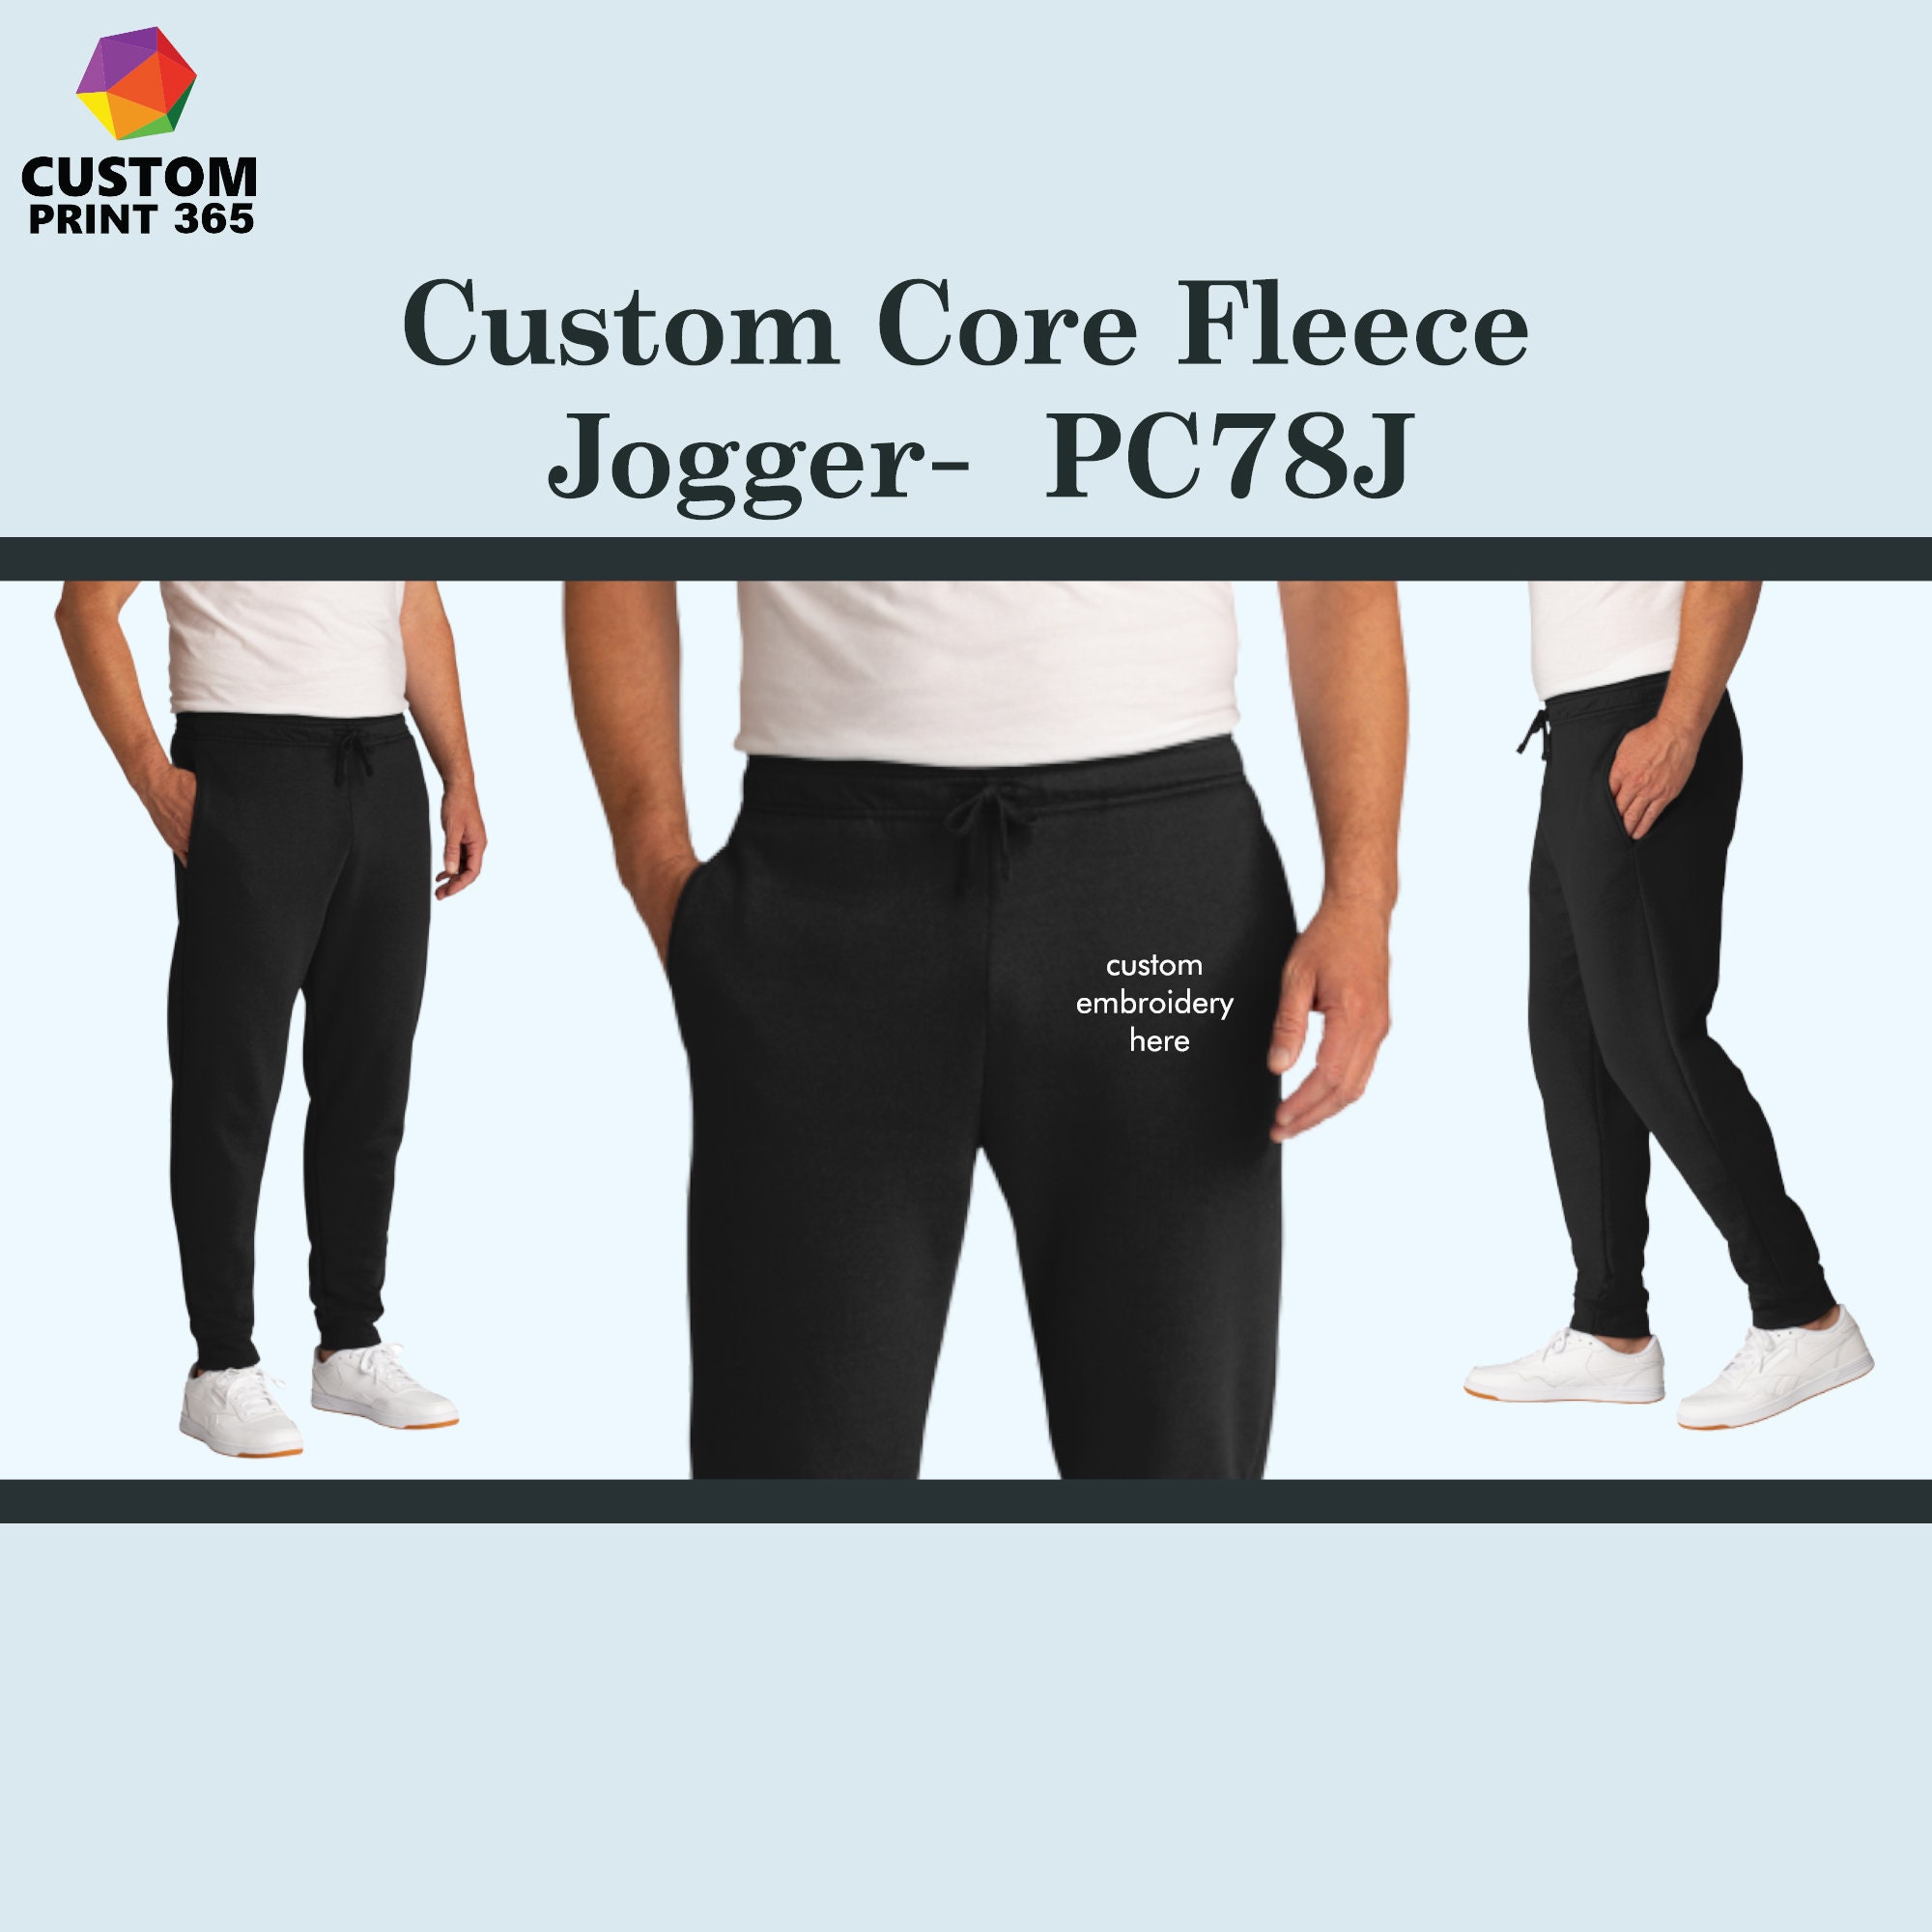 Jogging Trousers Embroidery Monogram